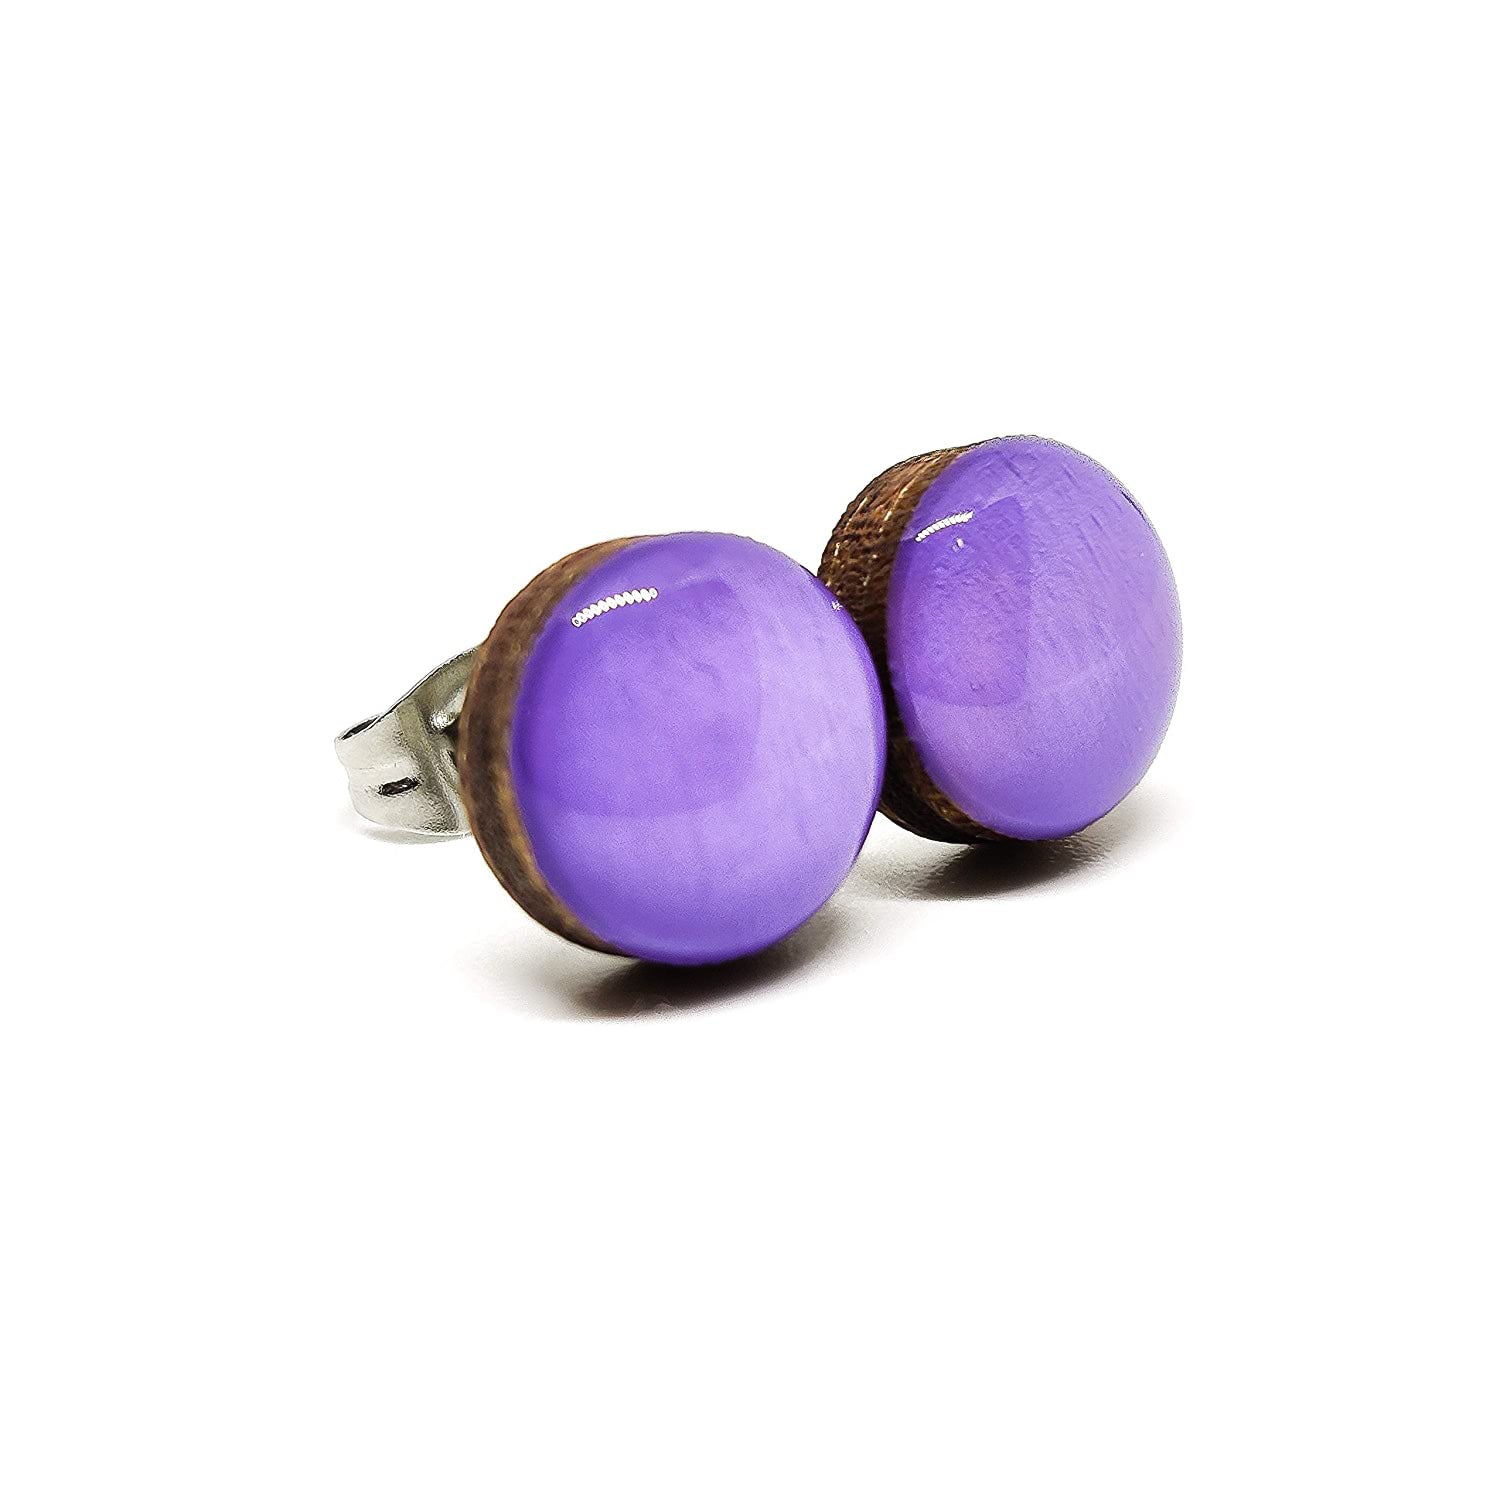 Stud Earrings, Lavender, 10 mm, Handmade, Stainless Steel Posts for Sensitive Ears - Candi Cove Designs  purple jade earrings, lavender stud earrings, lilac stud earrings, jade earrings, purple post earrings for women, lavender purple accessories jewelry, lavender earrings for women under 20, daphne earrings, lavender ball earrings, dot earrings, circle earrings, large stud earrings, button earrings, 